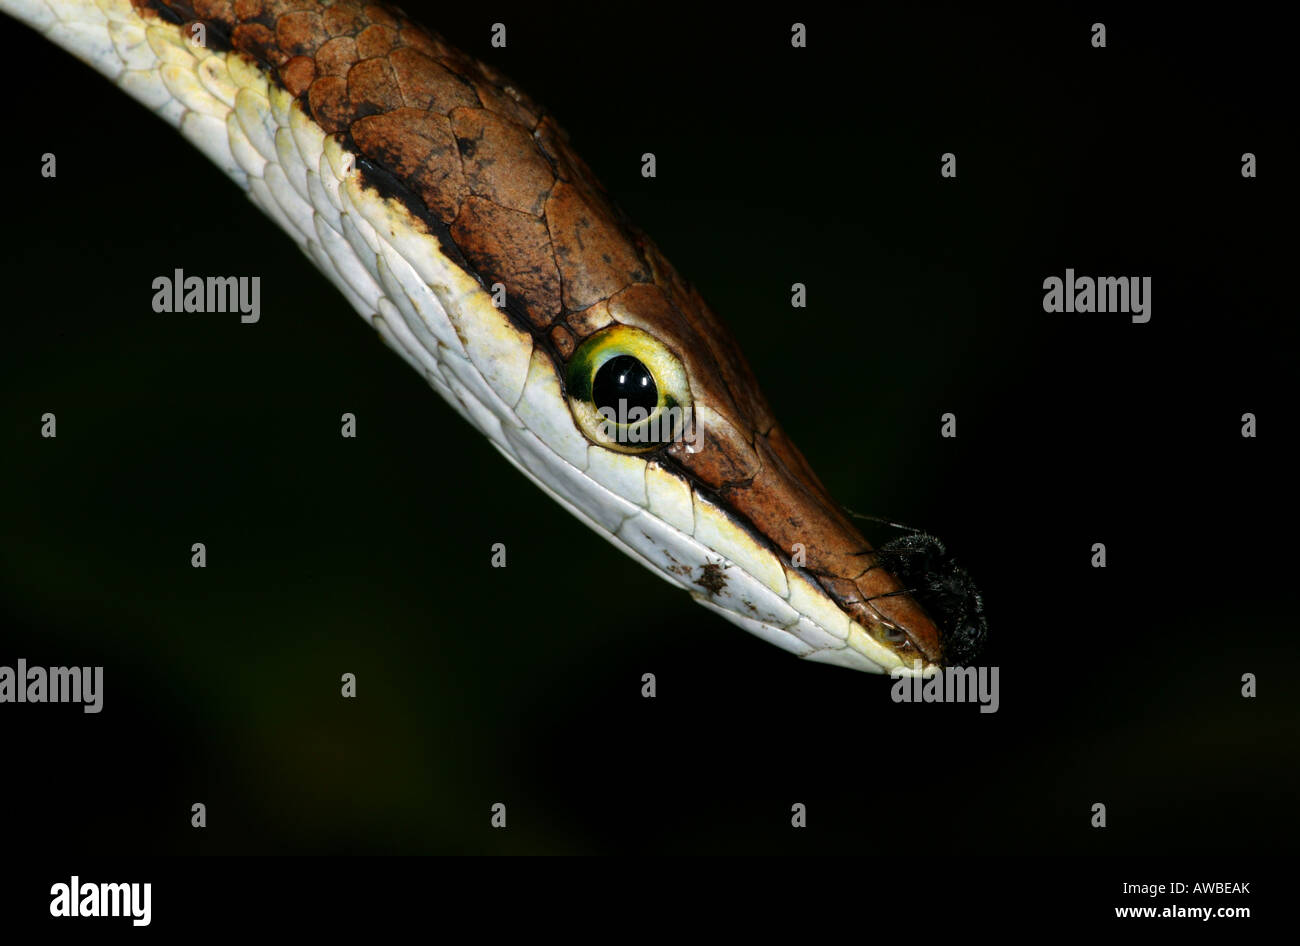 Panama wildlife with a close up portrait of a brown vine snake, Oxybelis aeneus, in Metropolitan nature park, Republic of Panama, Central America Stock Photo